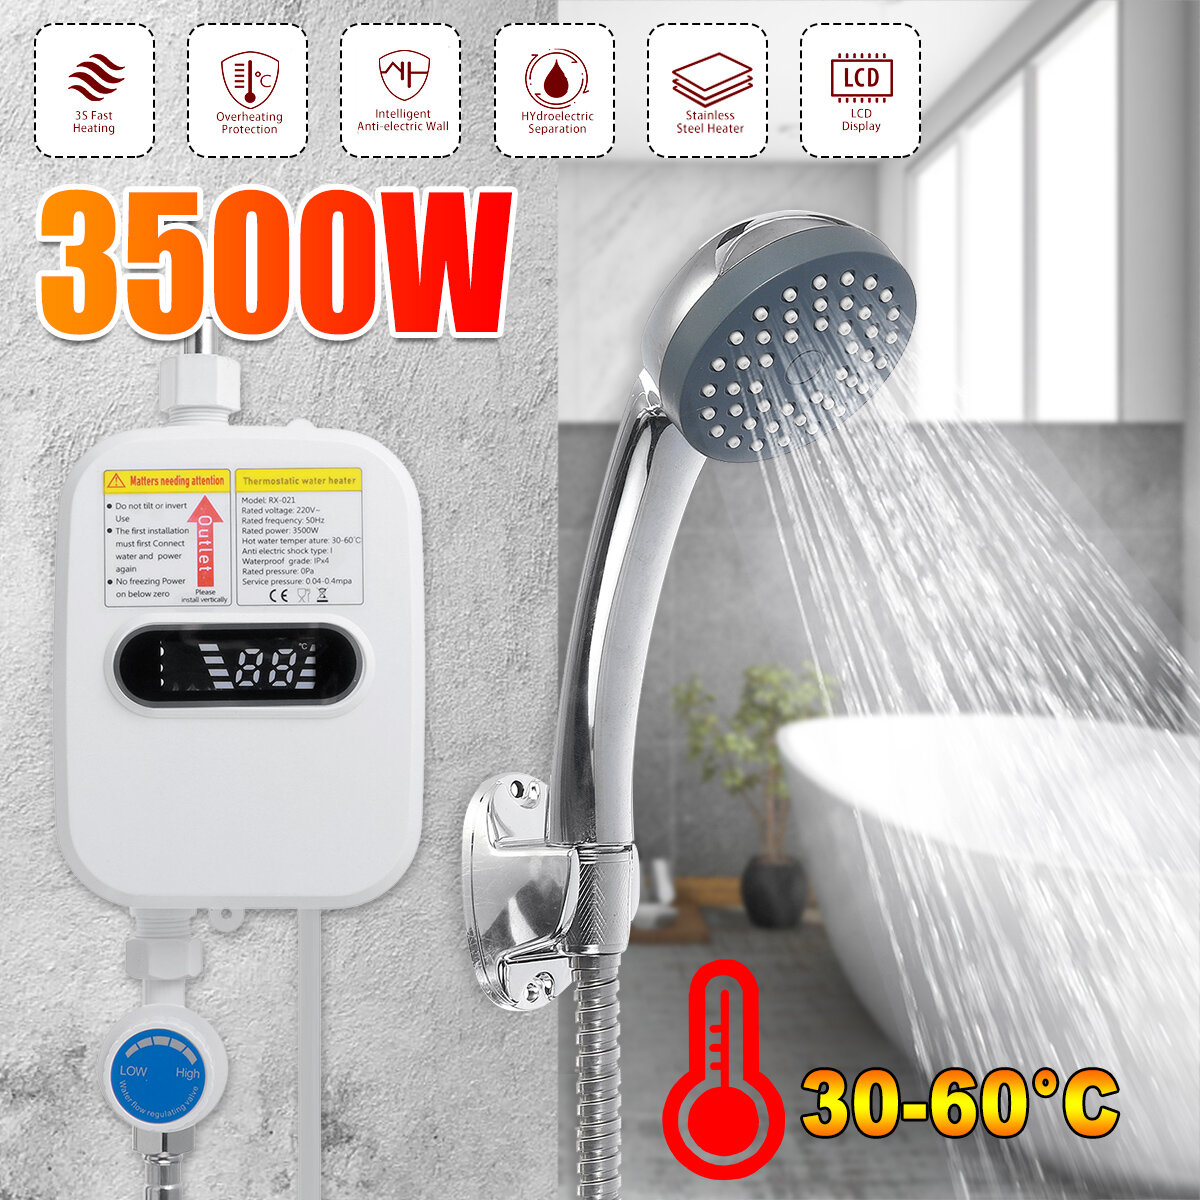 Image of [EU Direct] 3500W 220V Mini Water Heater Hot Electric Tankless Household Bathroom Faucet with Shower Head LCD Temperatur